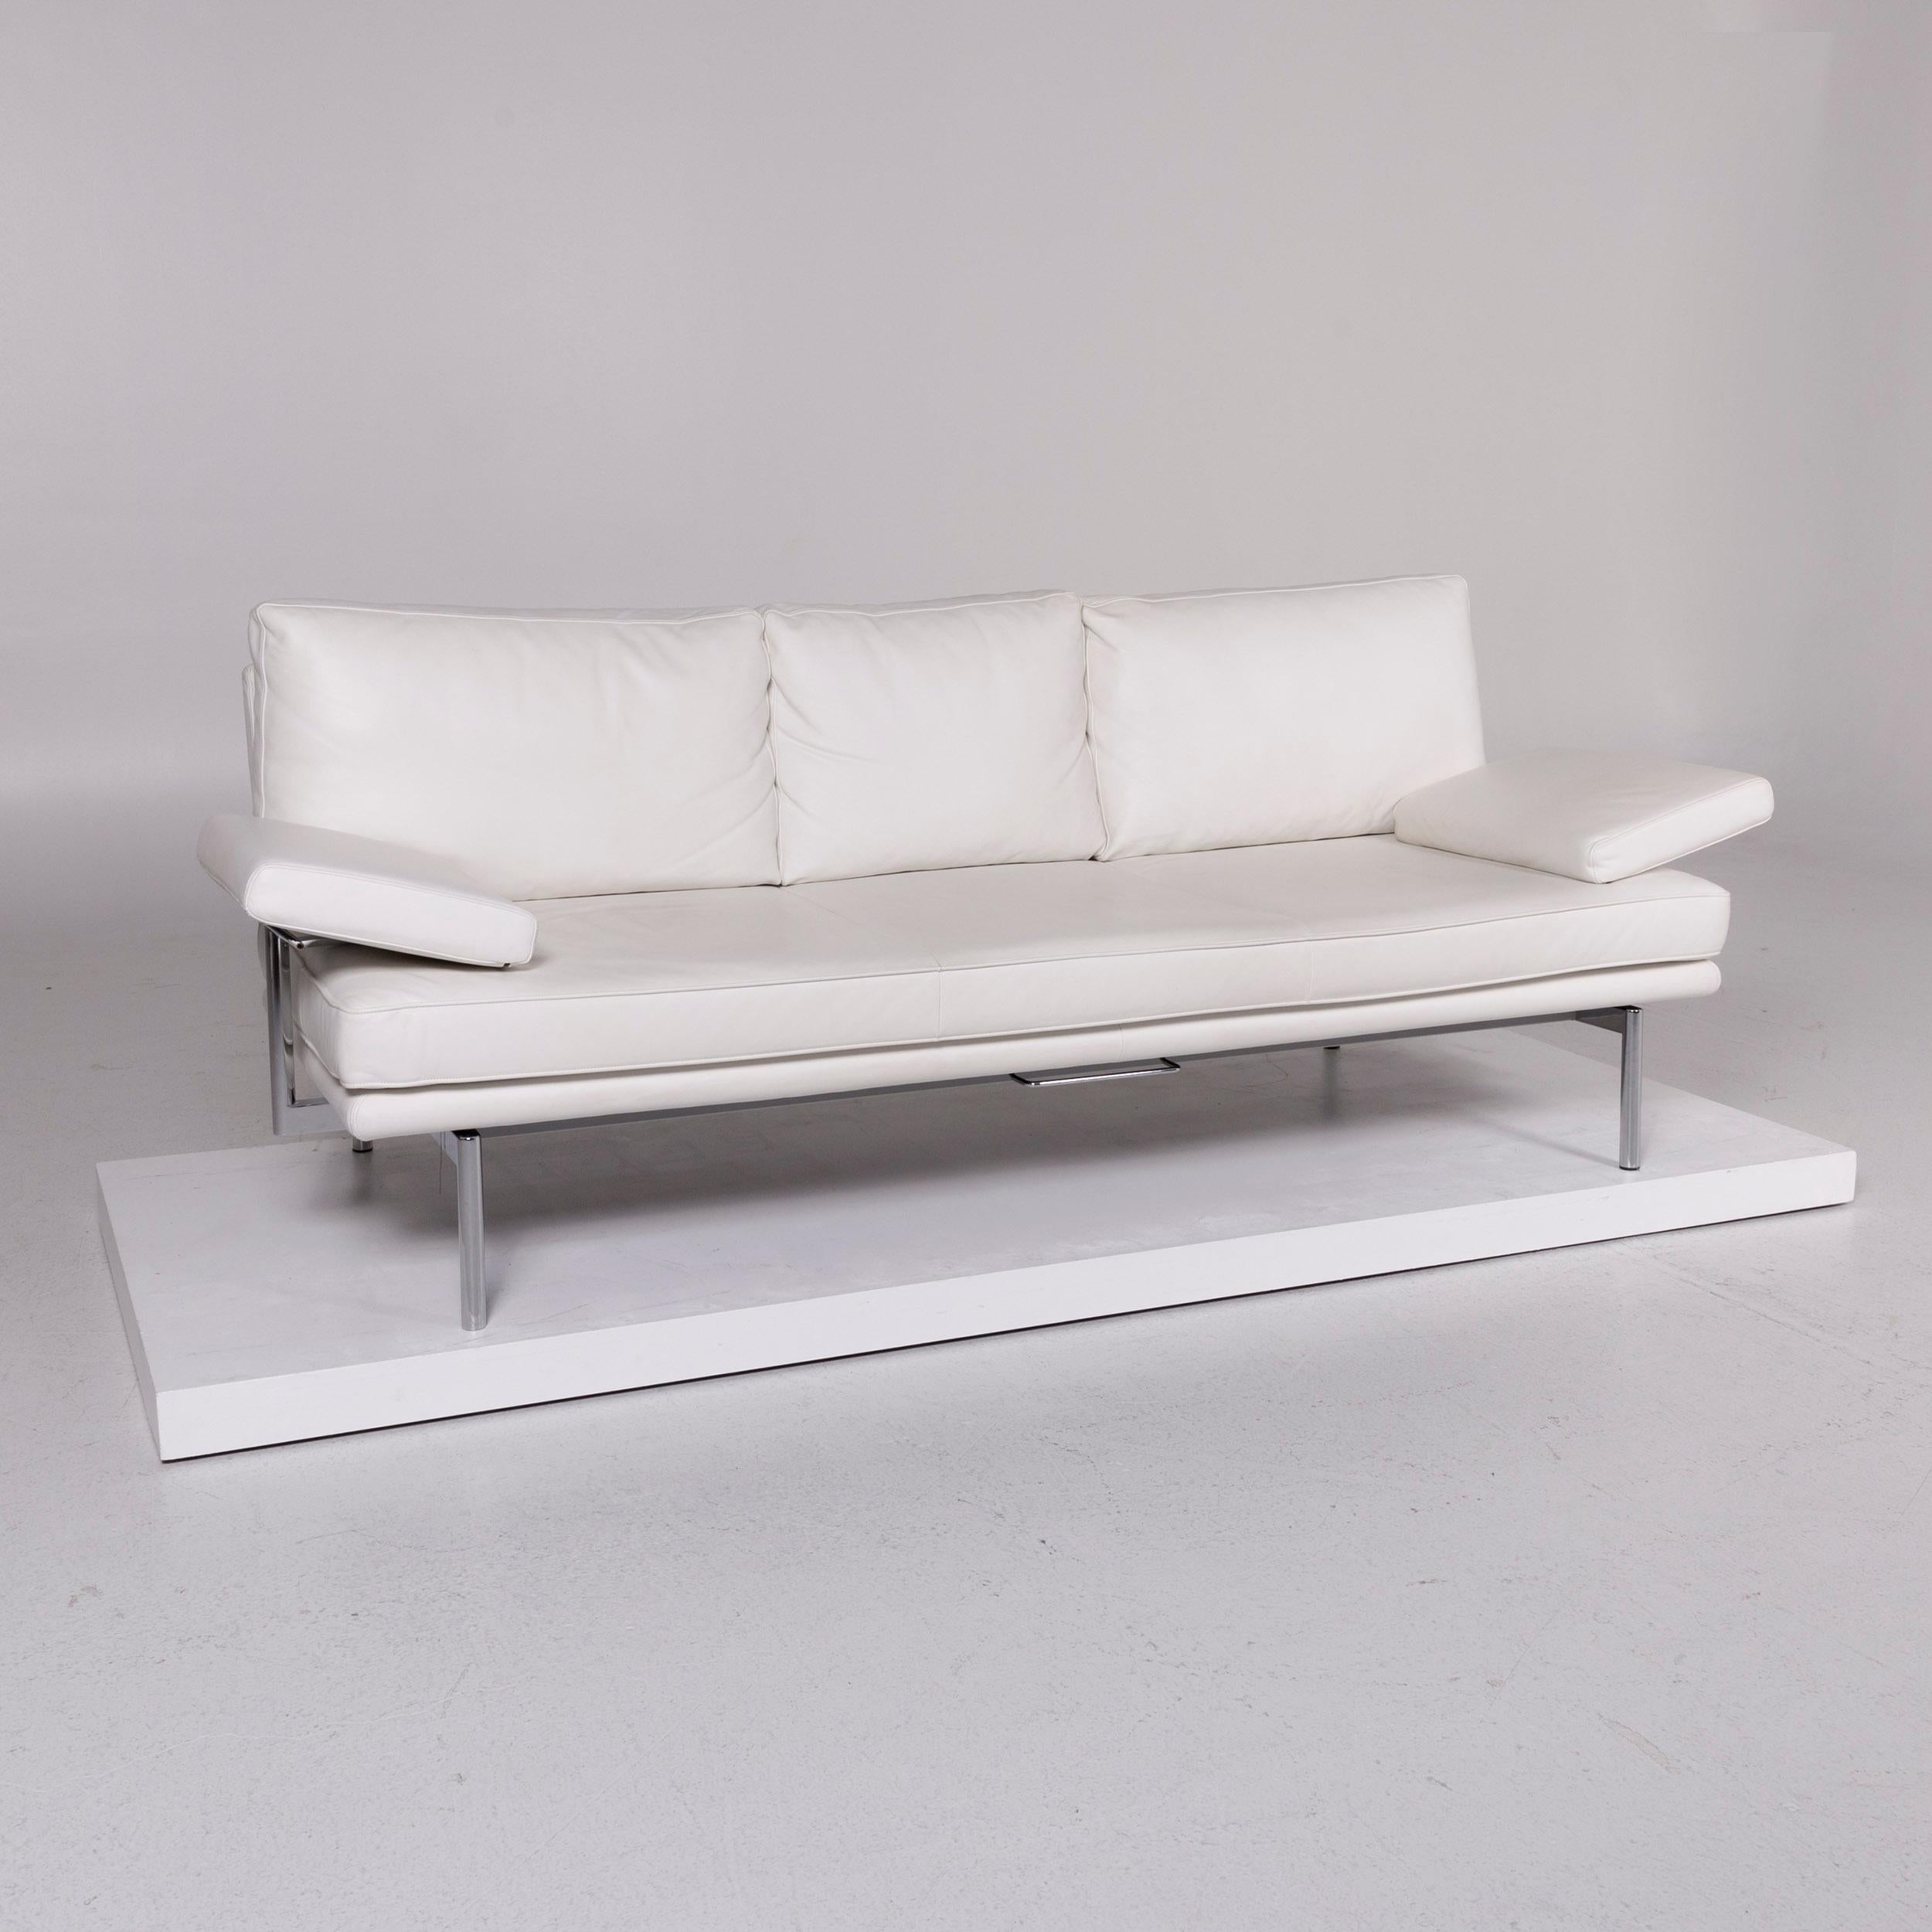 We bring to you a Walter Knoll living platform leather sofa white three-seat function couch.

 

 Product measurements in centimeters:
 

 Depth 90
Width 220
Height 83
Seat-height 54
Rest-height 59
Seat-depth 66
Seat-width